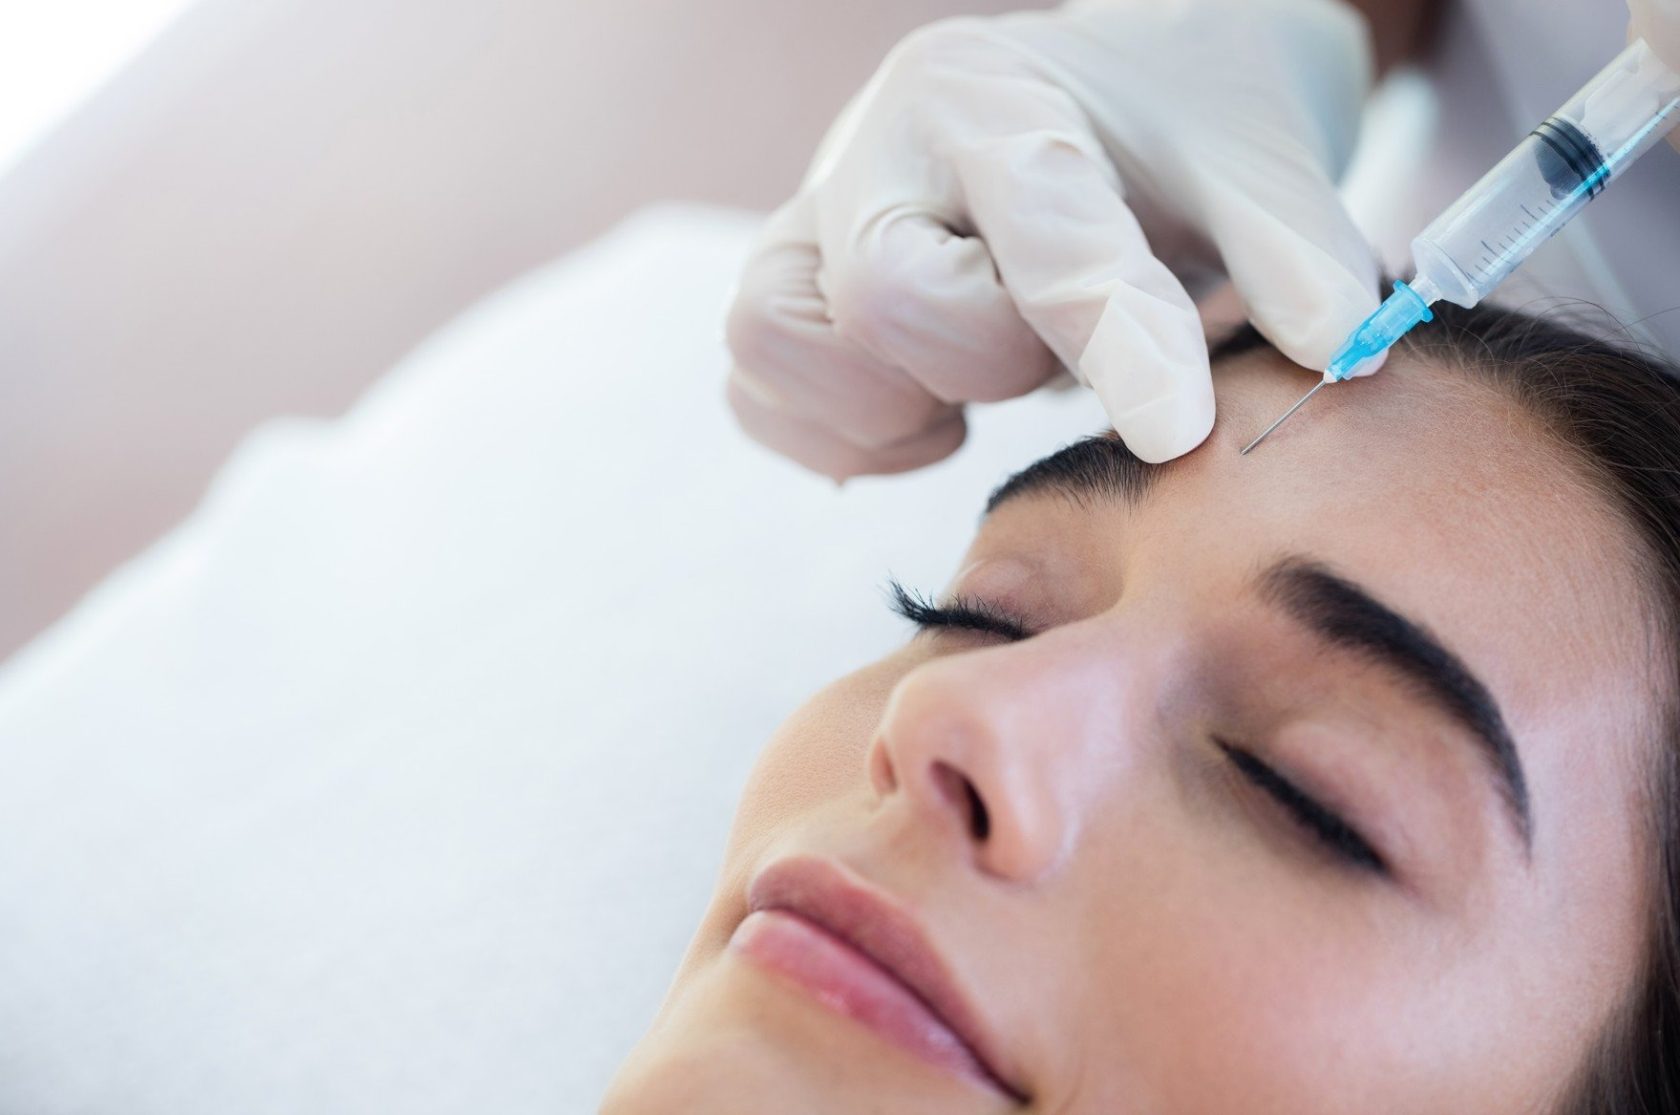 Woman receiving botox injection at spa, Image: 280779326, License: Royalty-free, Restrictions: , Model Release: yes, Credit line: Profimedia, Wavebreak